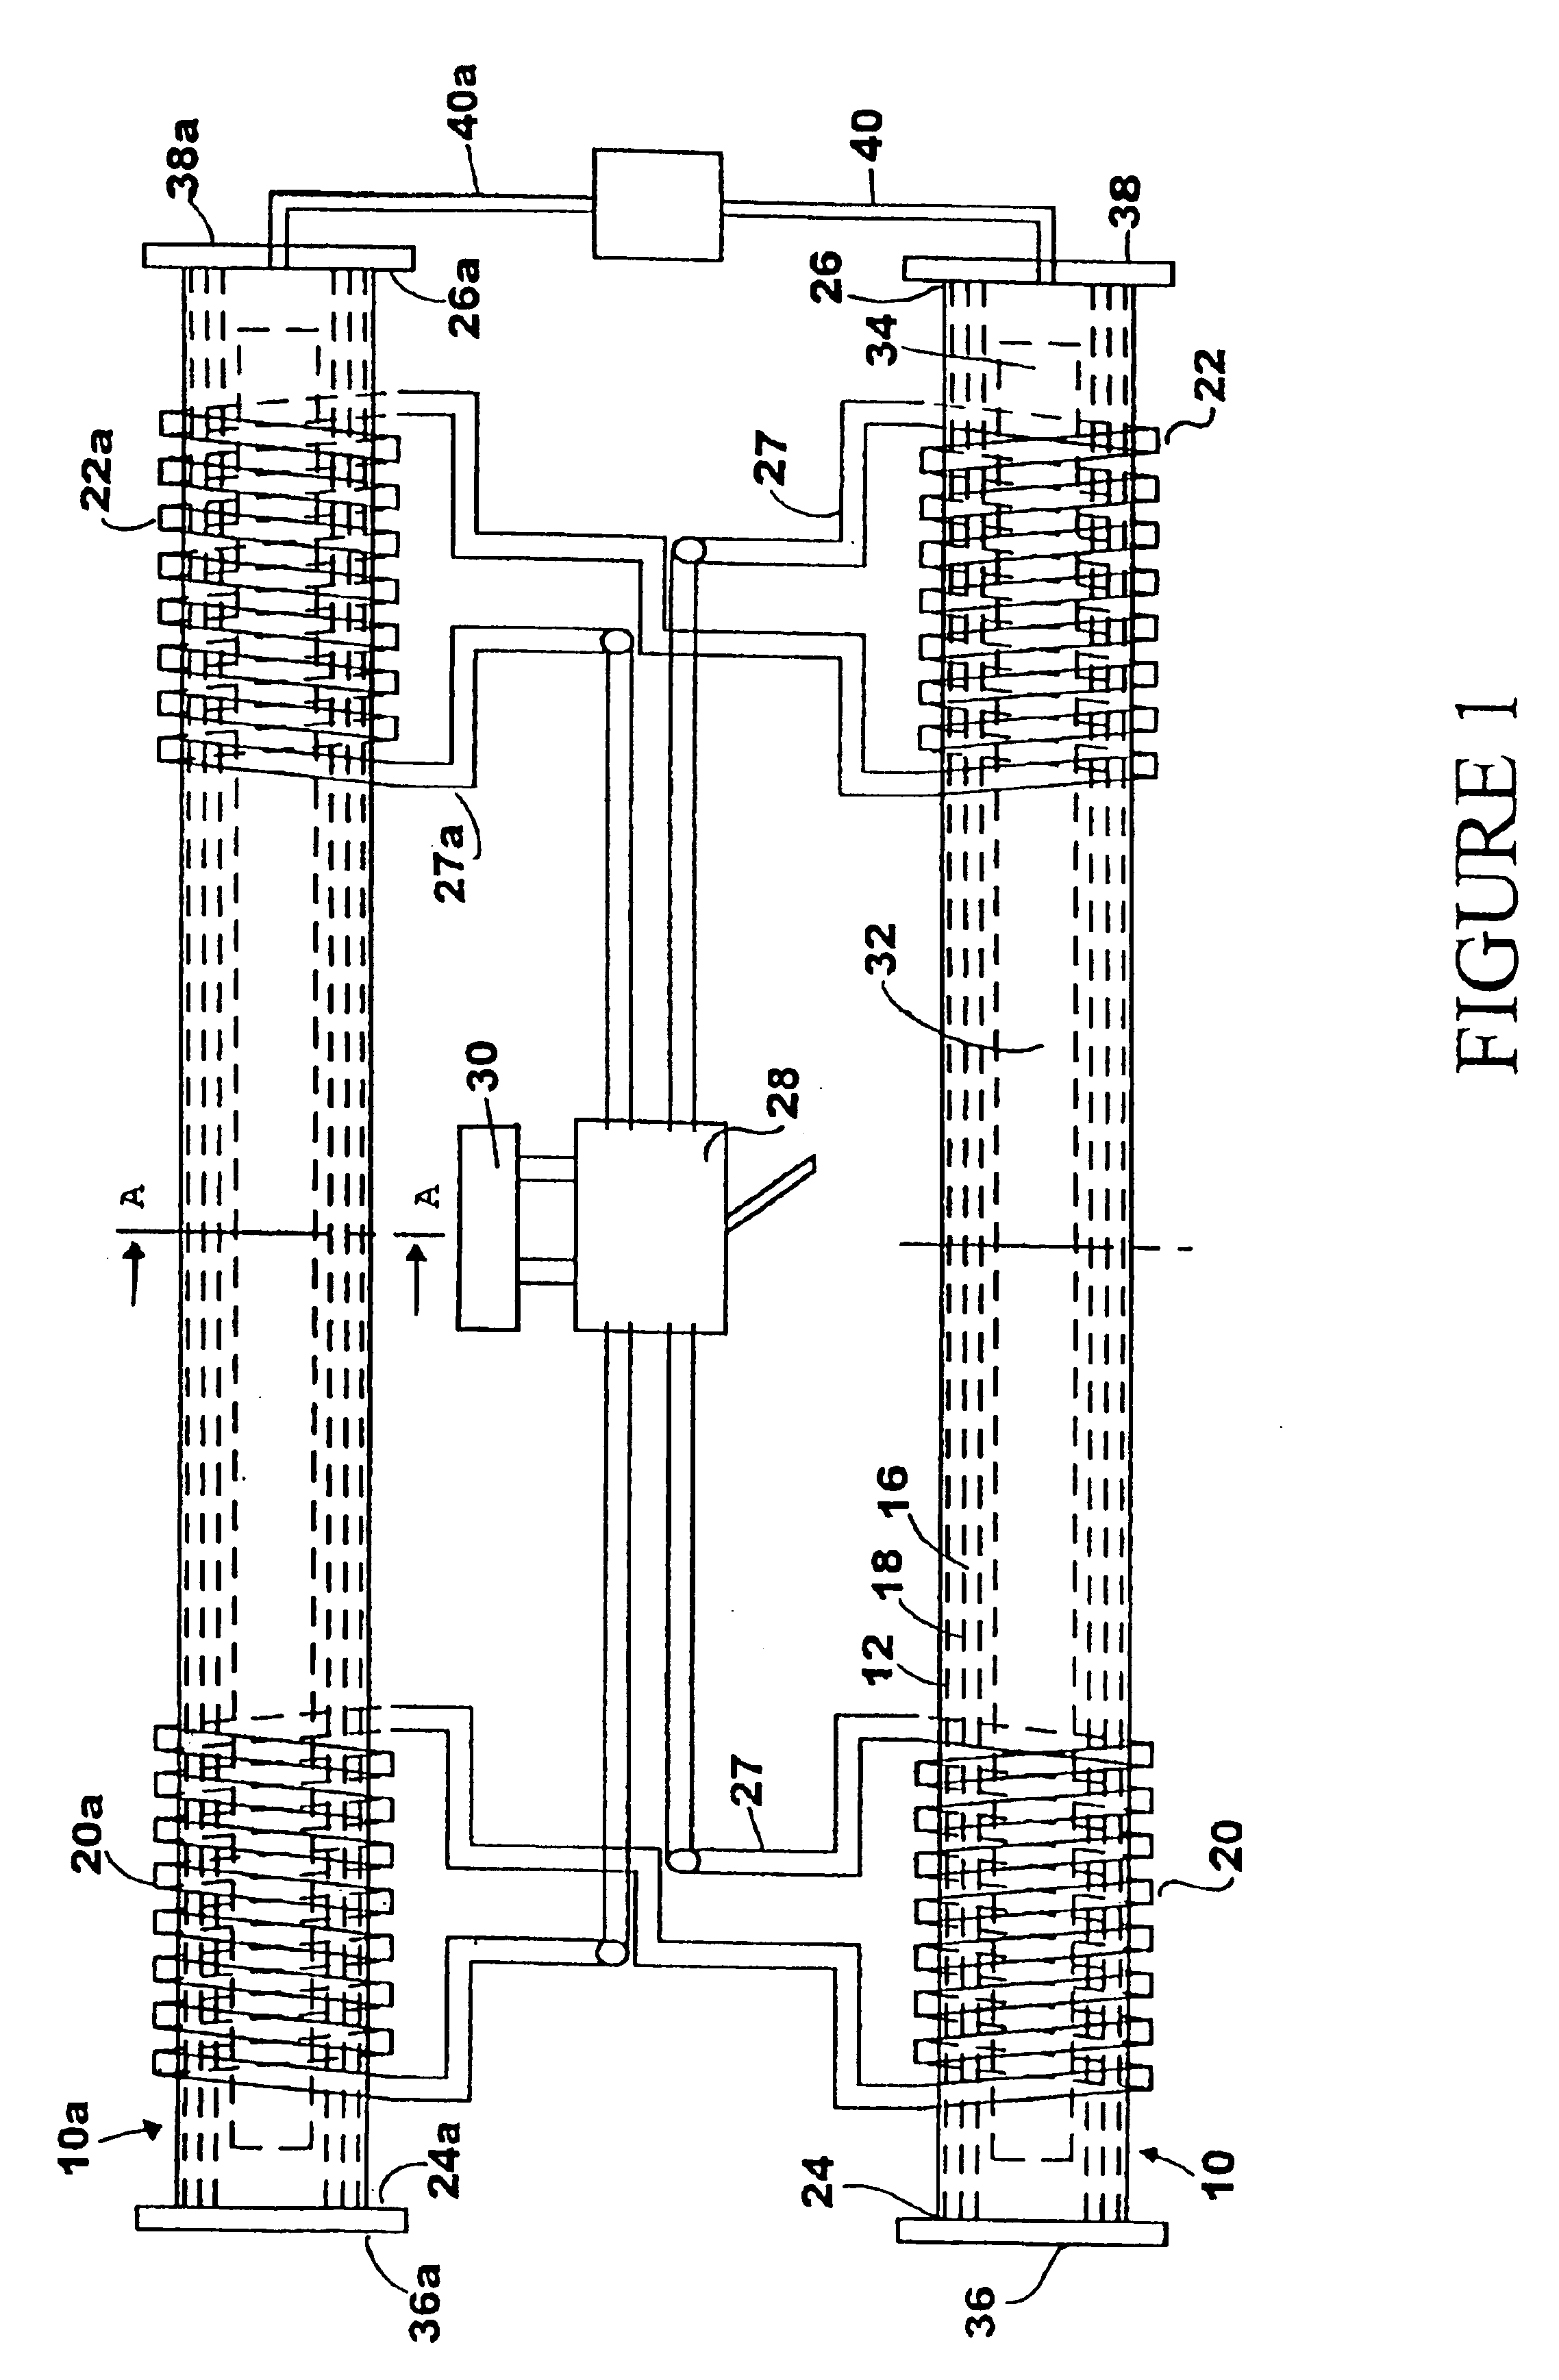 Method for making a silicon carbide resistor with silicon/silicon carbide contacts by induction heating